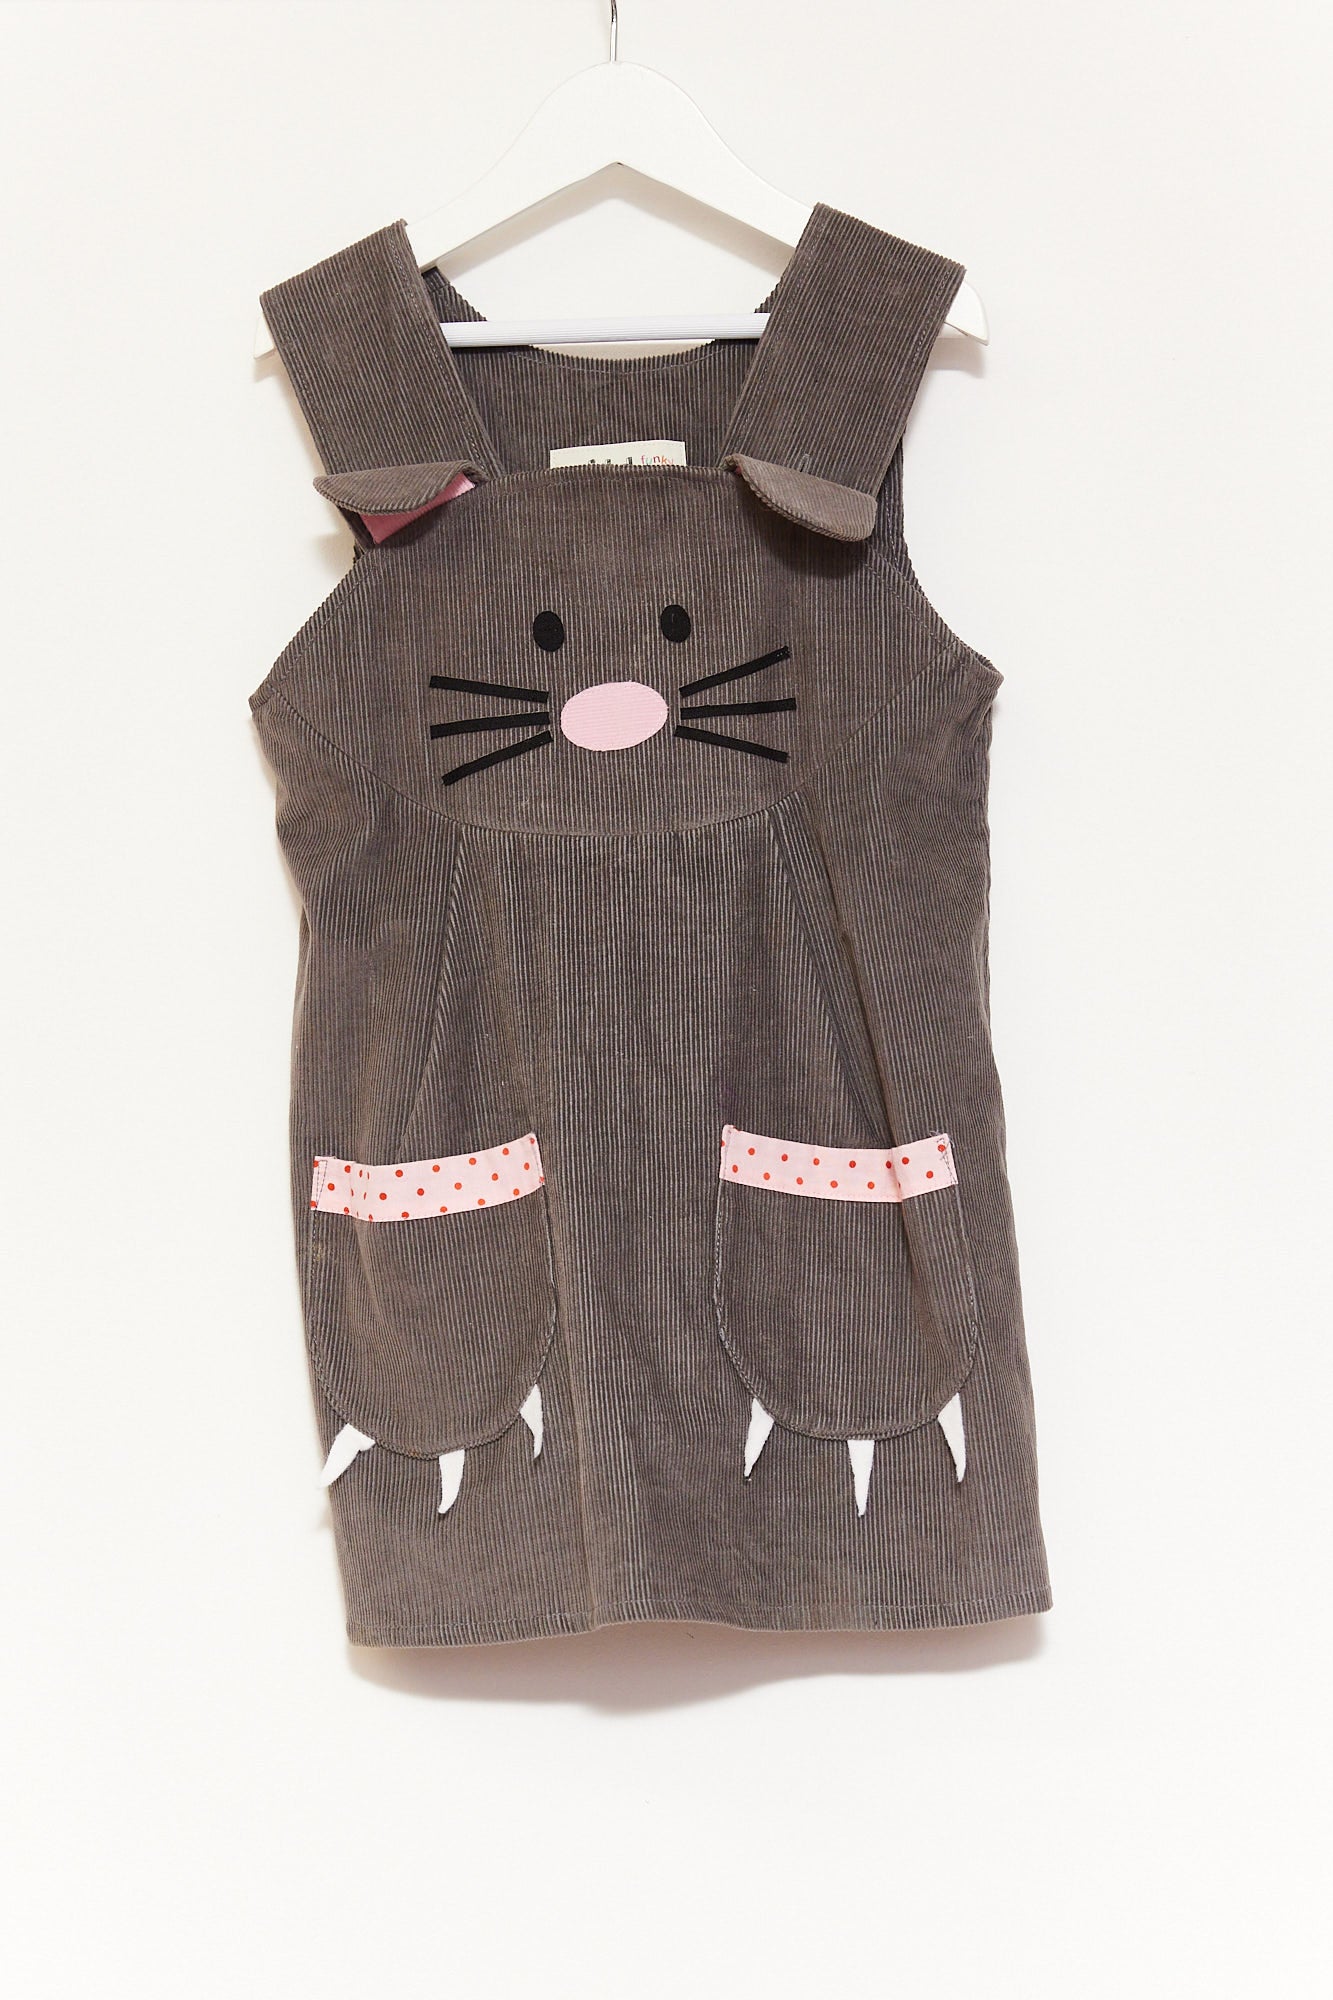 Kids Wild Things Funky Little Dresses Grey Mouse dress age 7